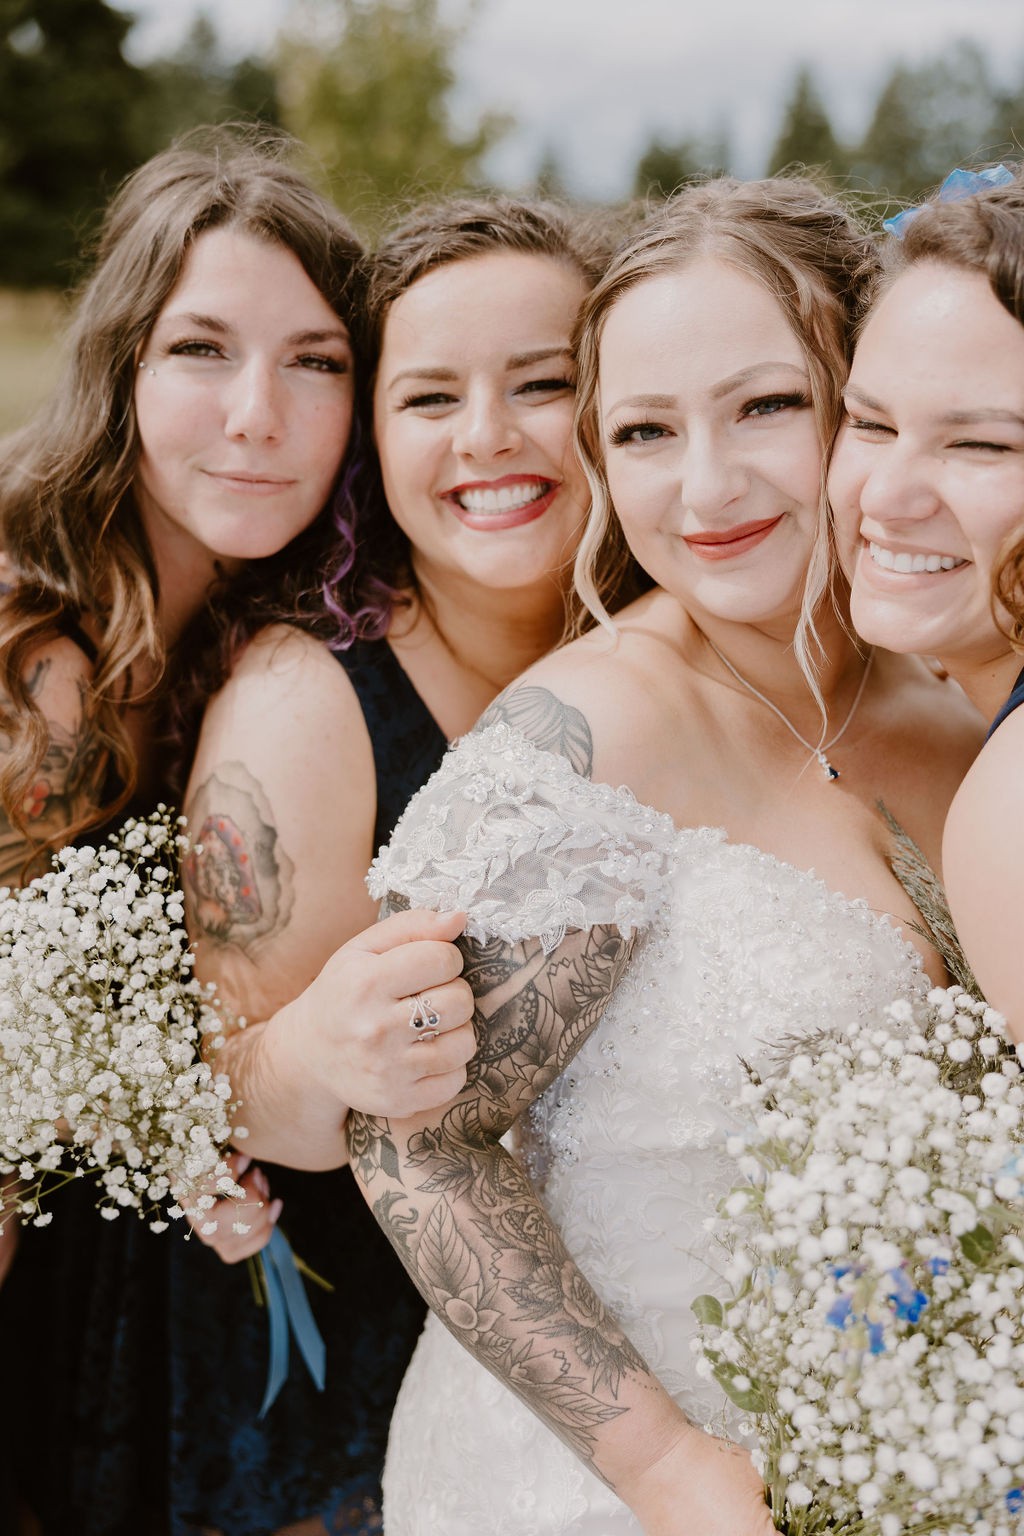 The bride and her bridesmaids share a joyful moment together, holding bouquets of flowers.